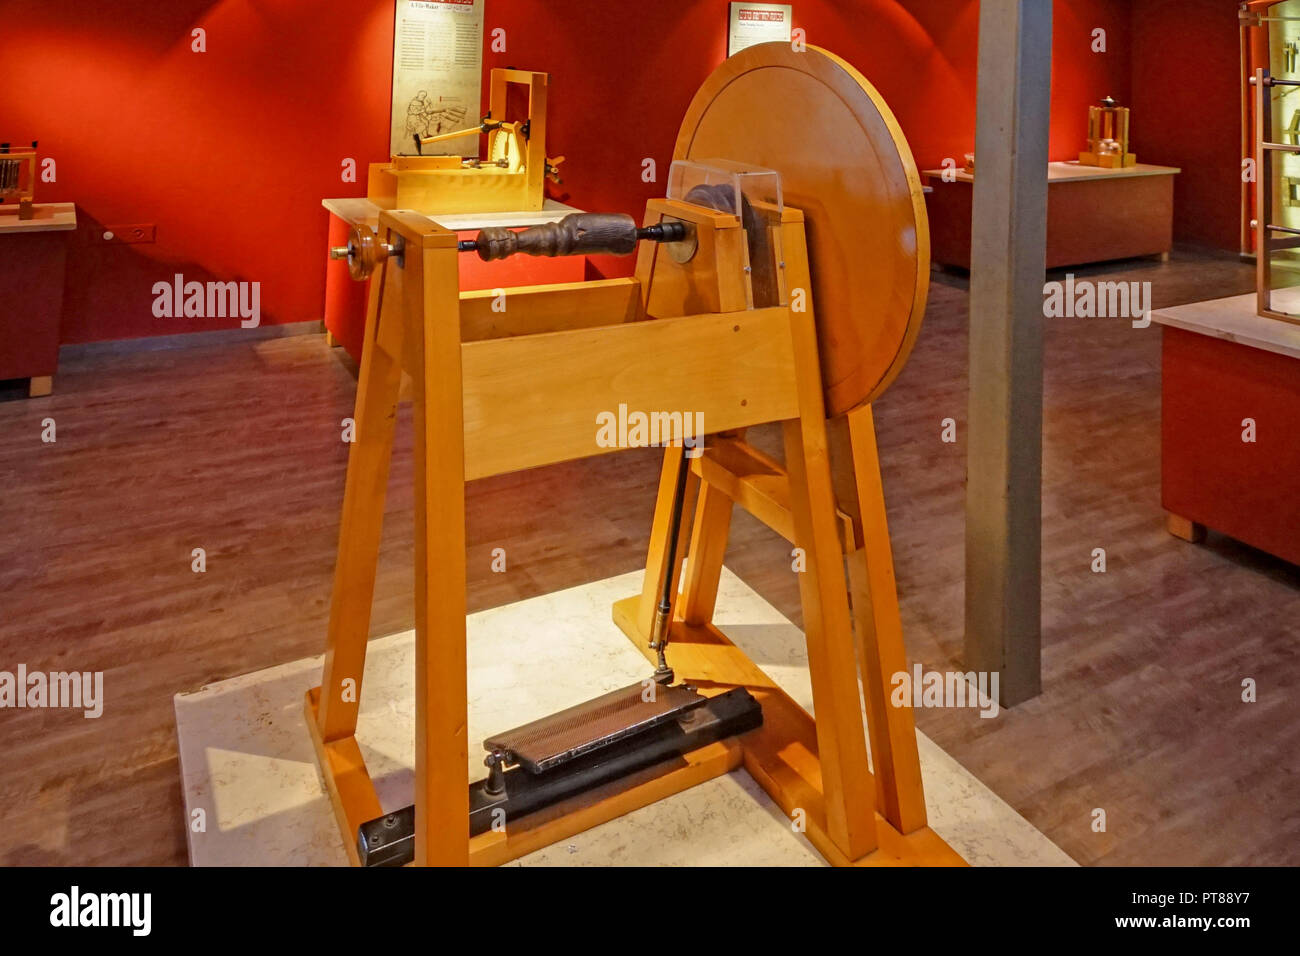 Exhibit based on the design and drawings of Leonardo Da Vinci recreated to display in the Haifa Science Museum, Israel Stock Photo